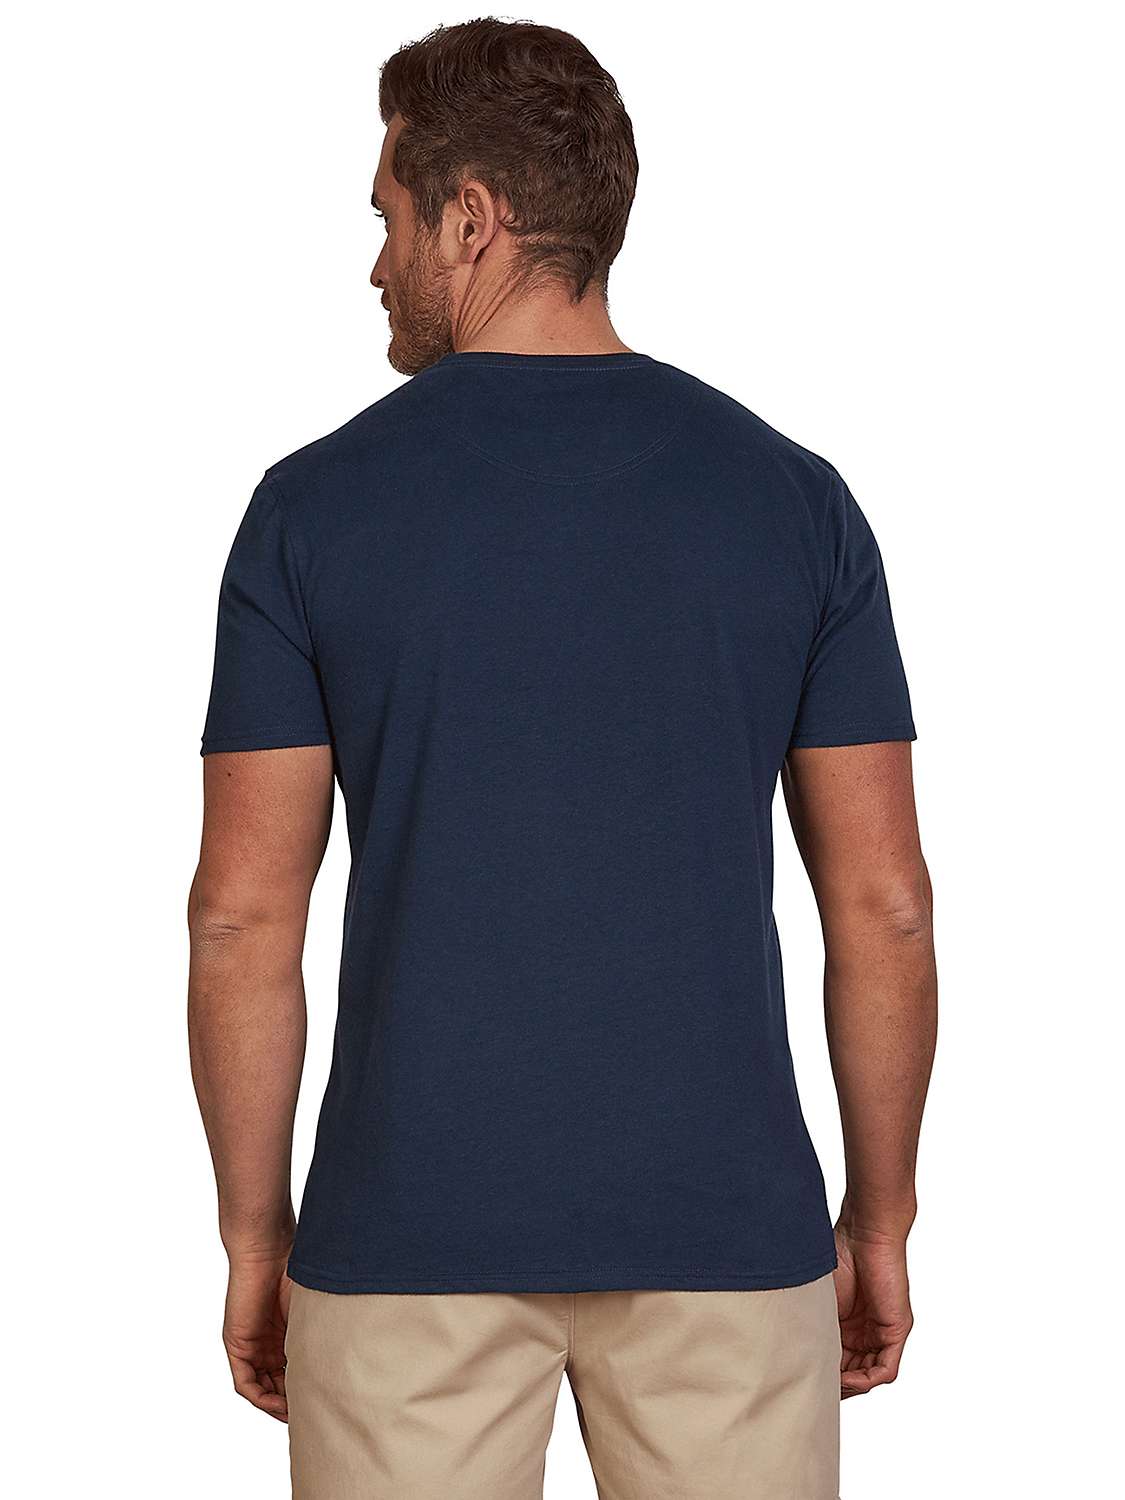 Raging Bull Scatter Stitch T-Shirt, Navy at John Lewis & Partners